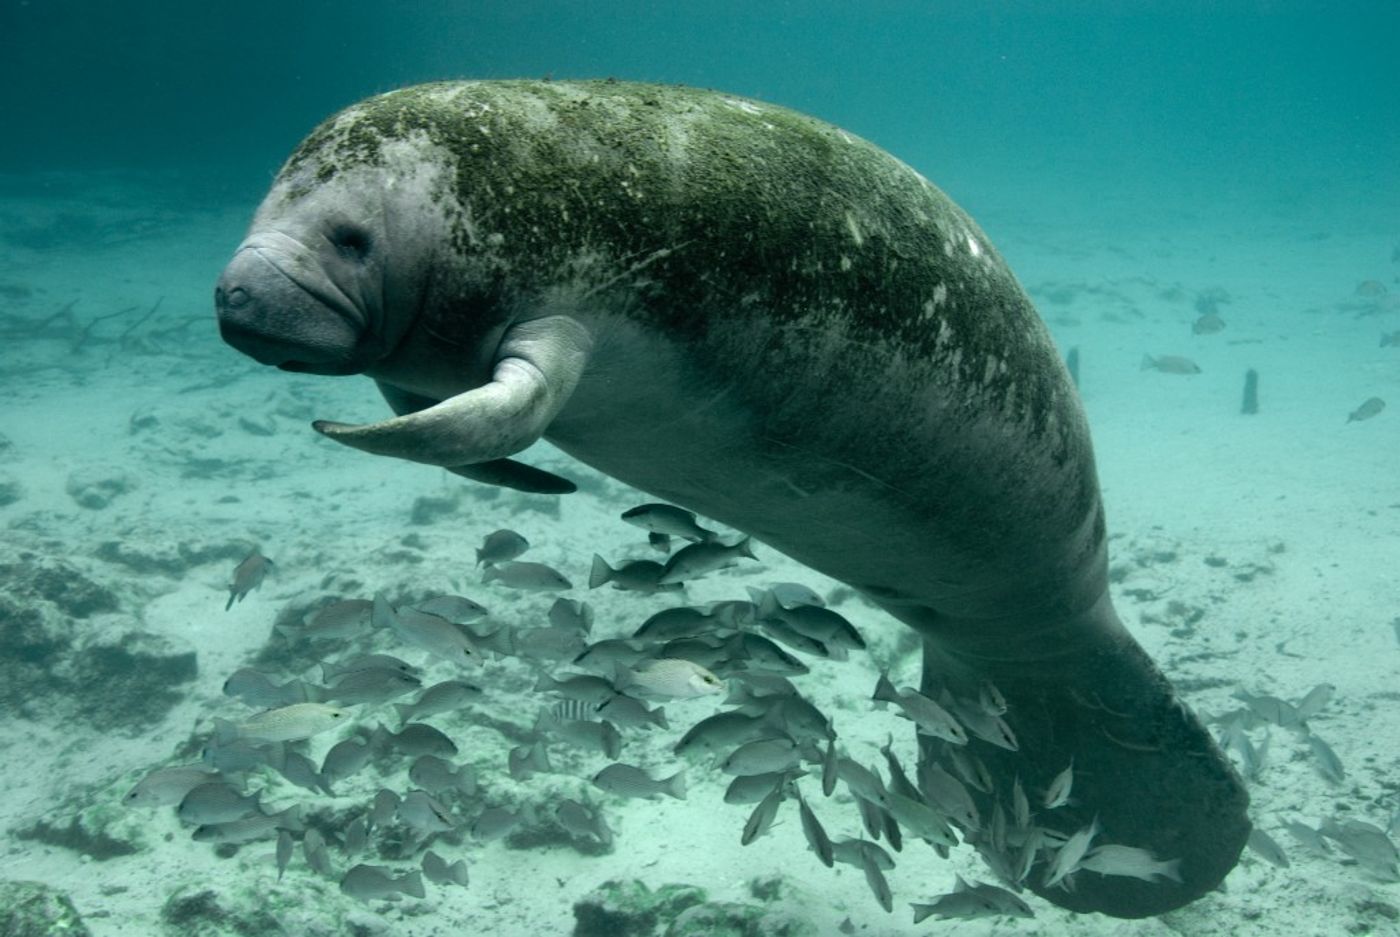 Manatee numbers off the coast of Florida are growing.